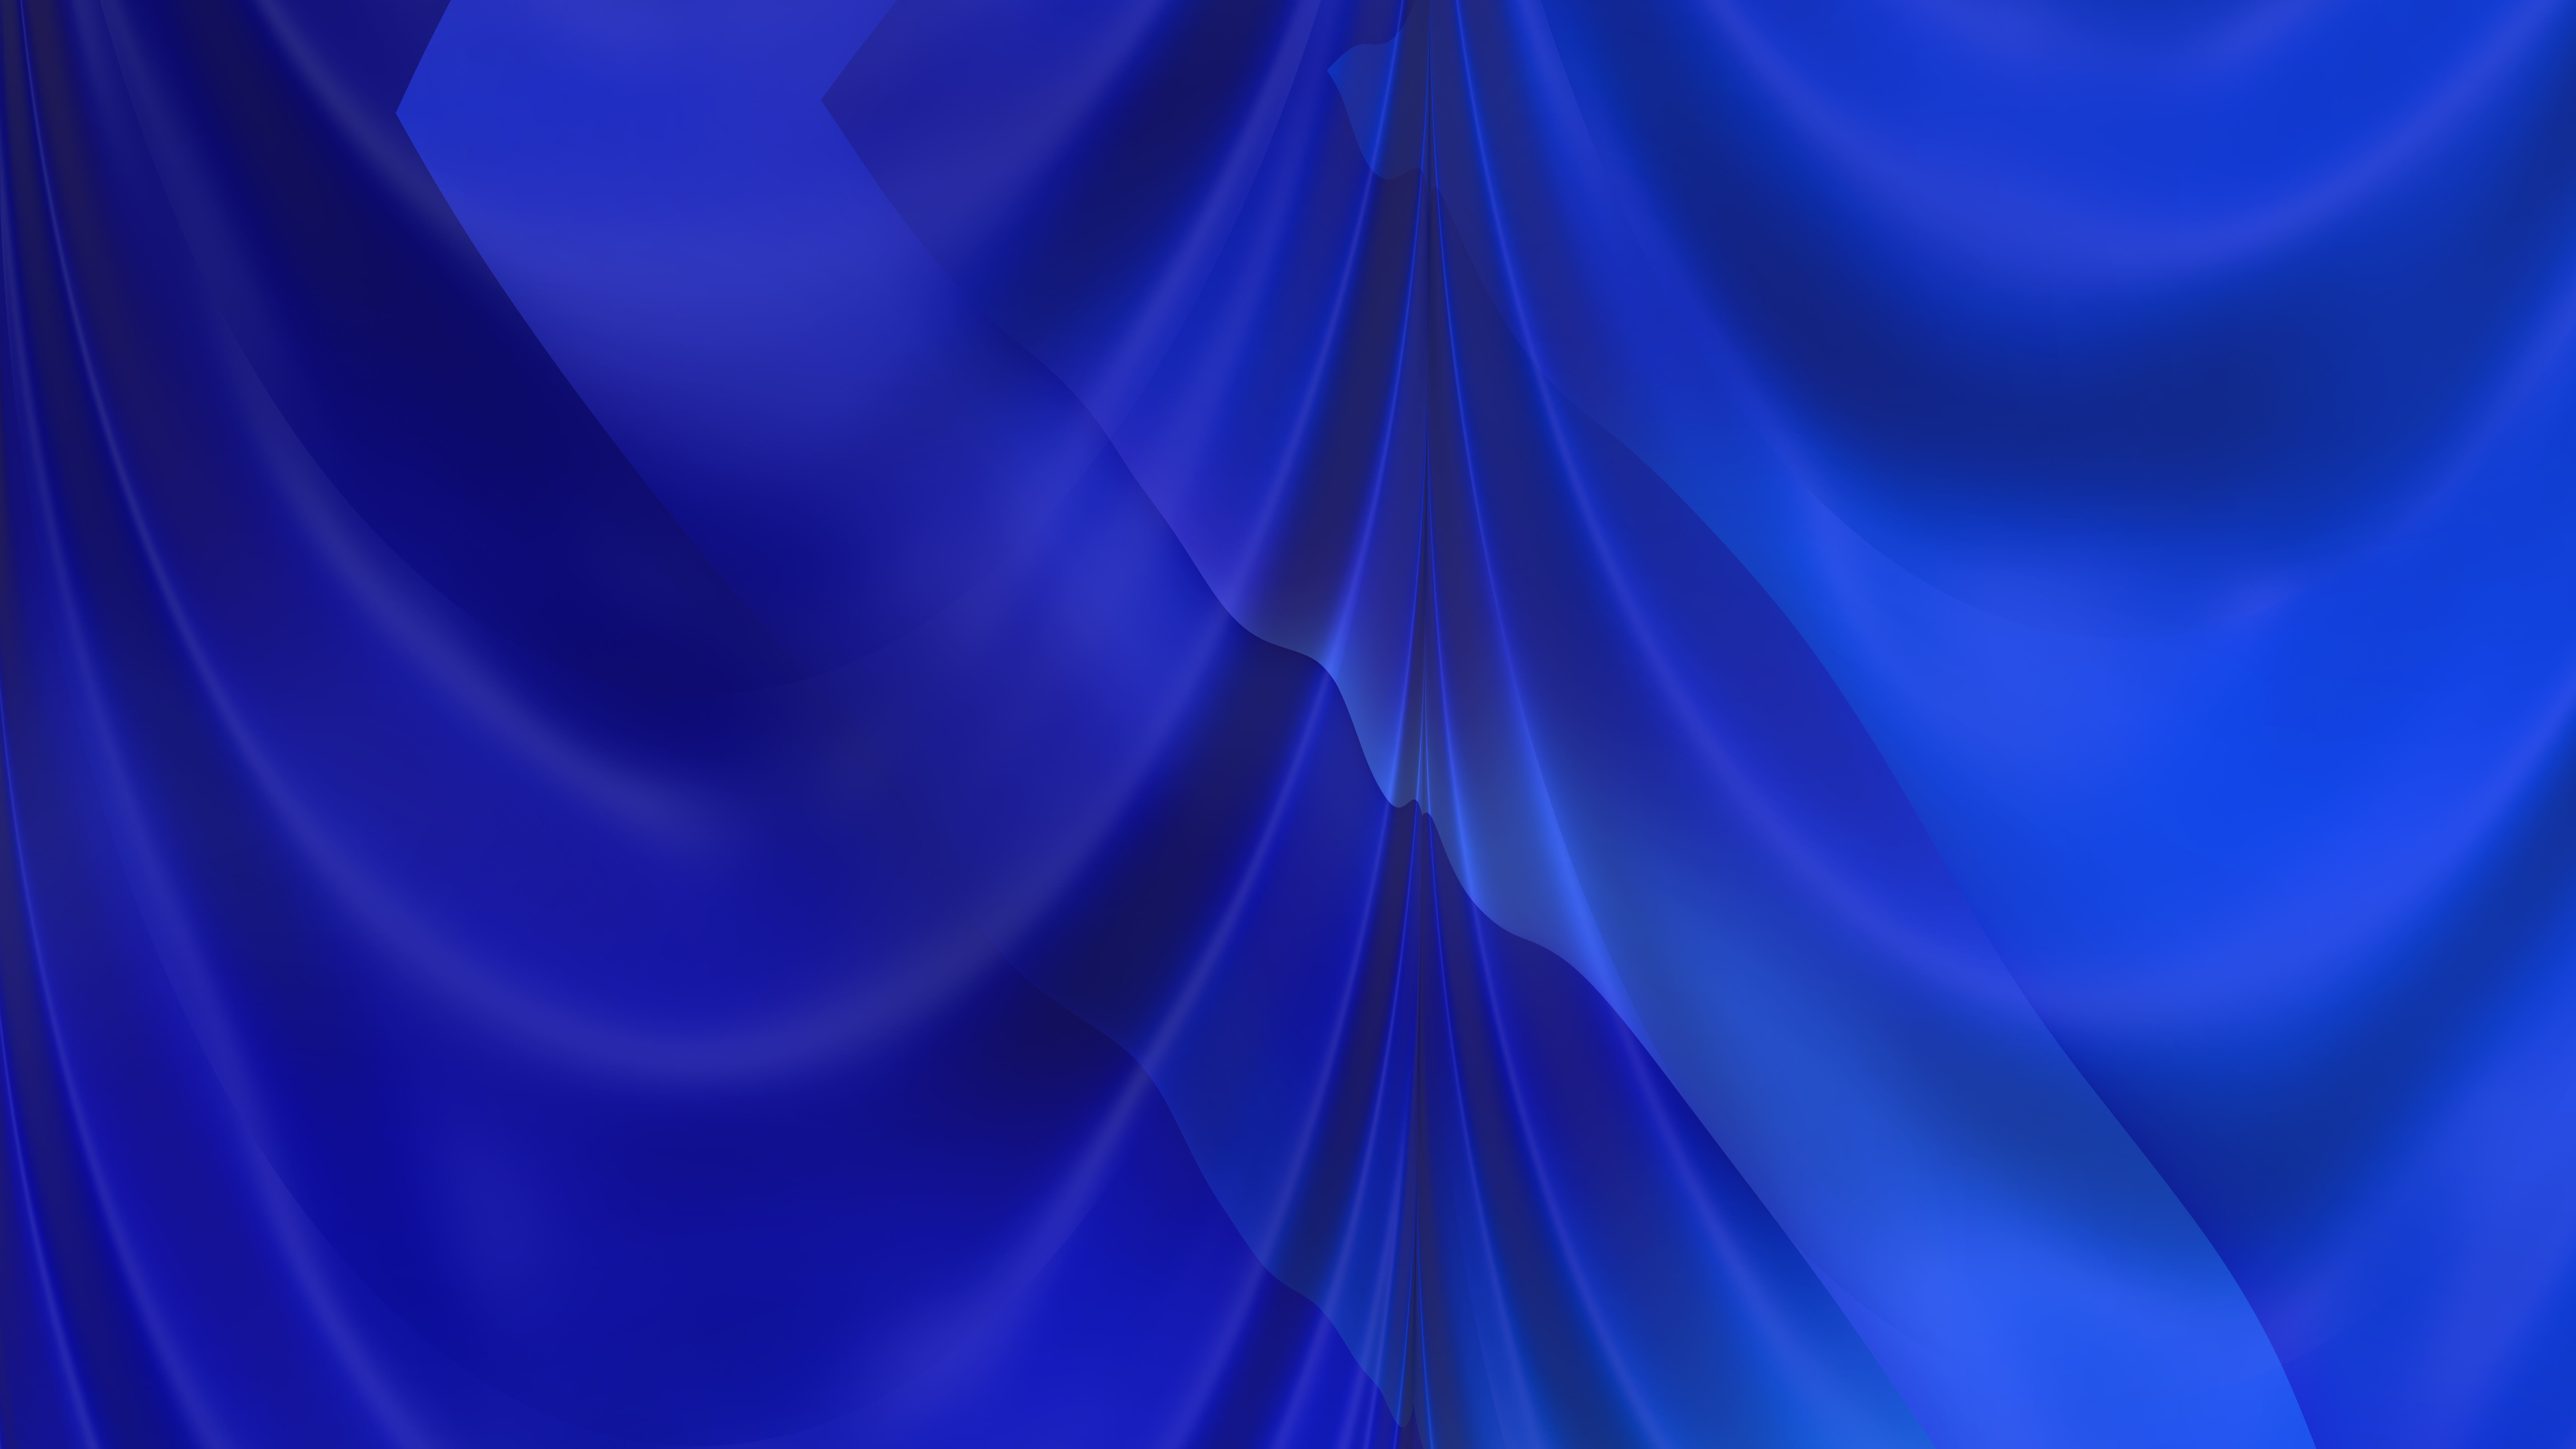 Free Royal Blue Abstract Texture Background Image